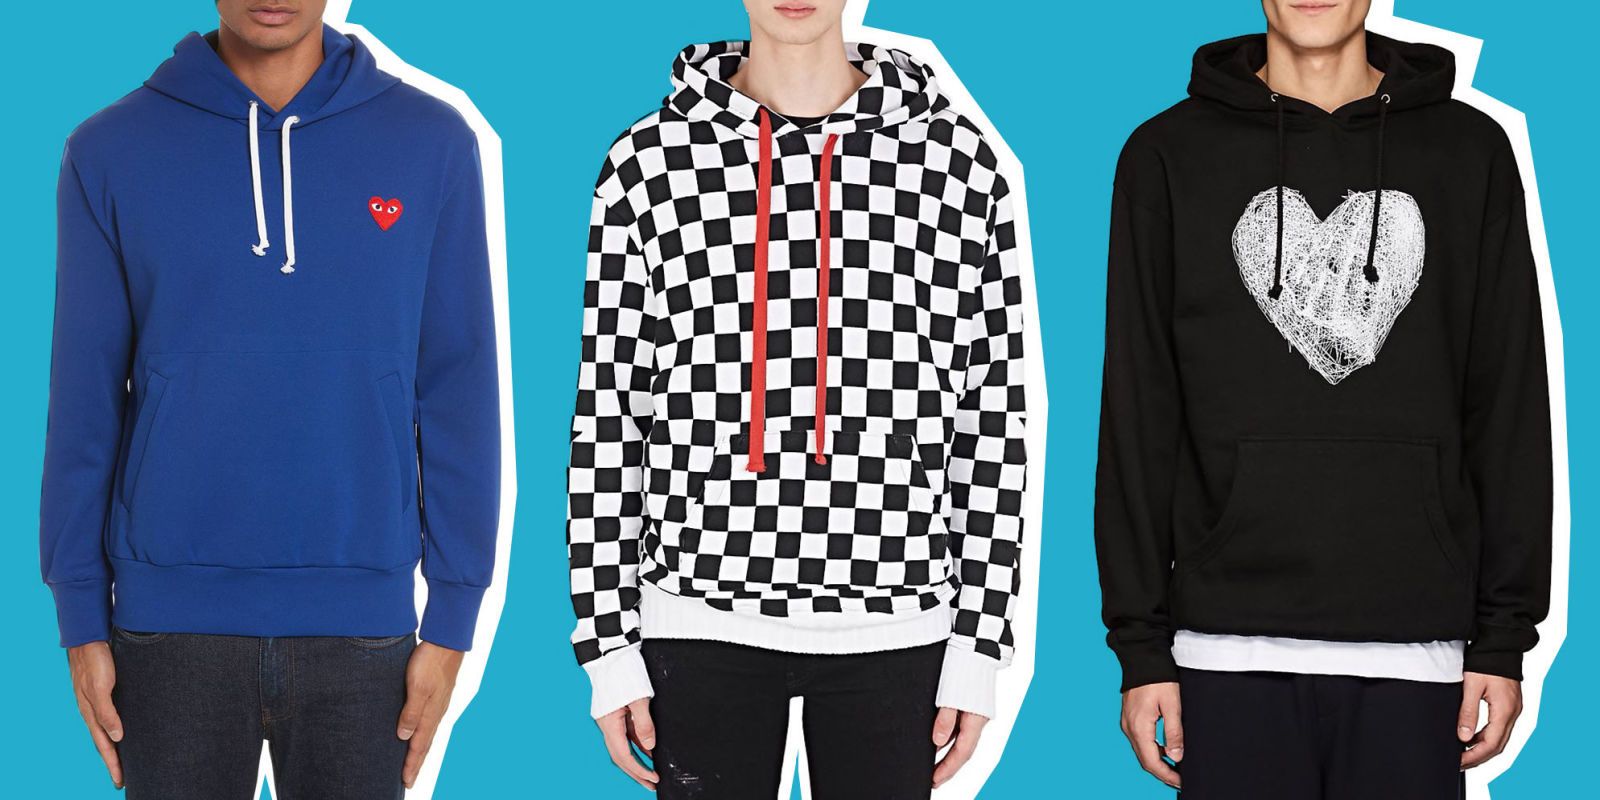 Stay Cool and Cool with Trendy Hoodies - Street Of Styles